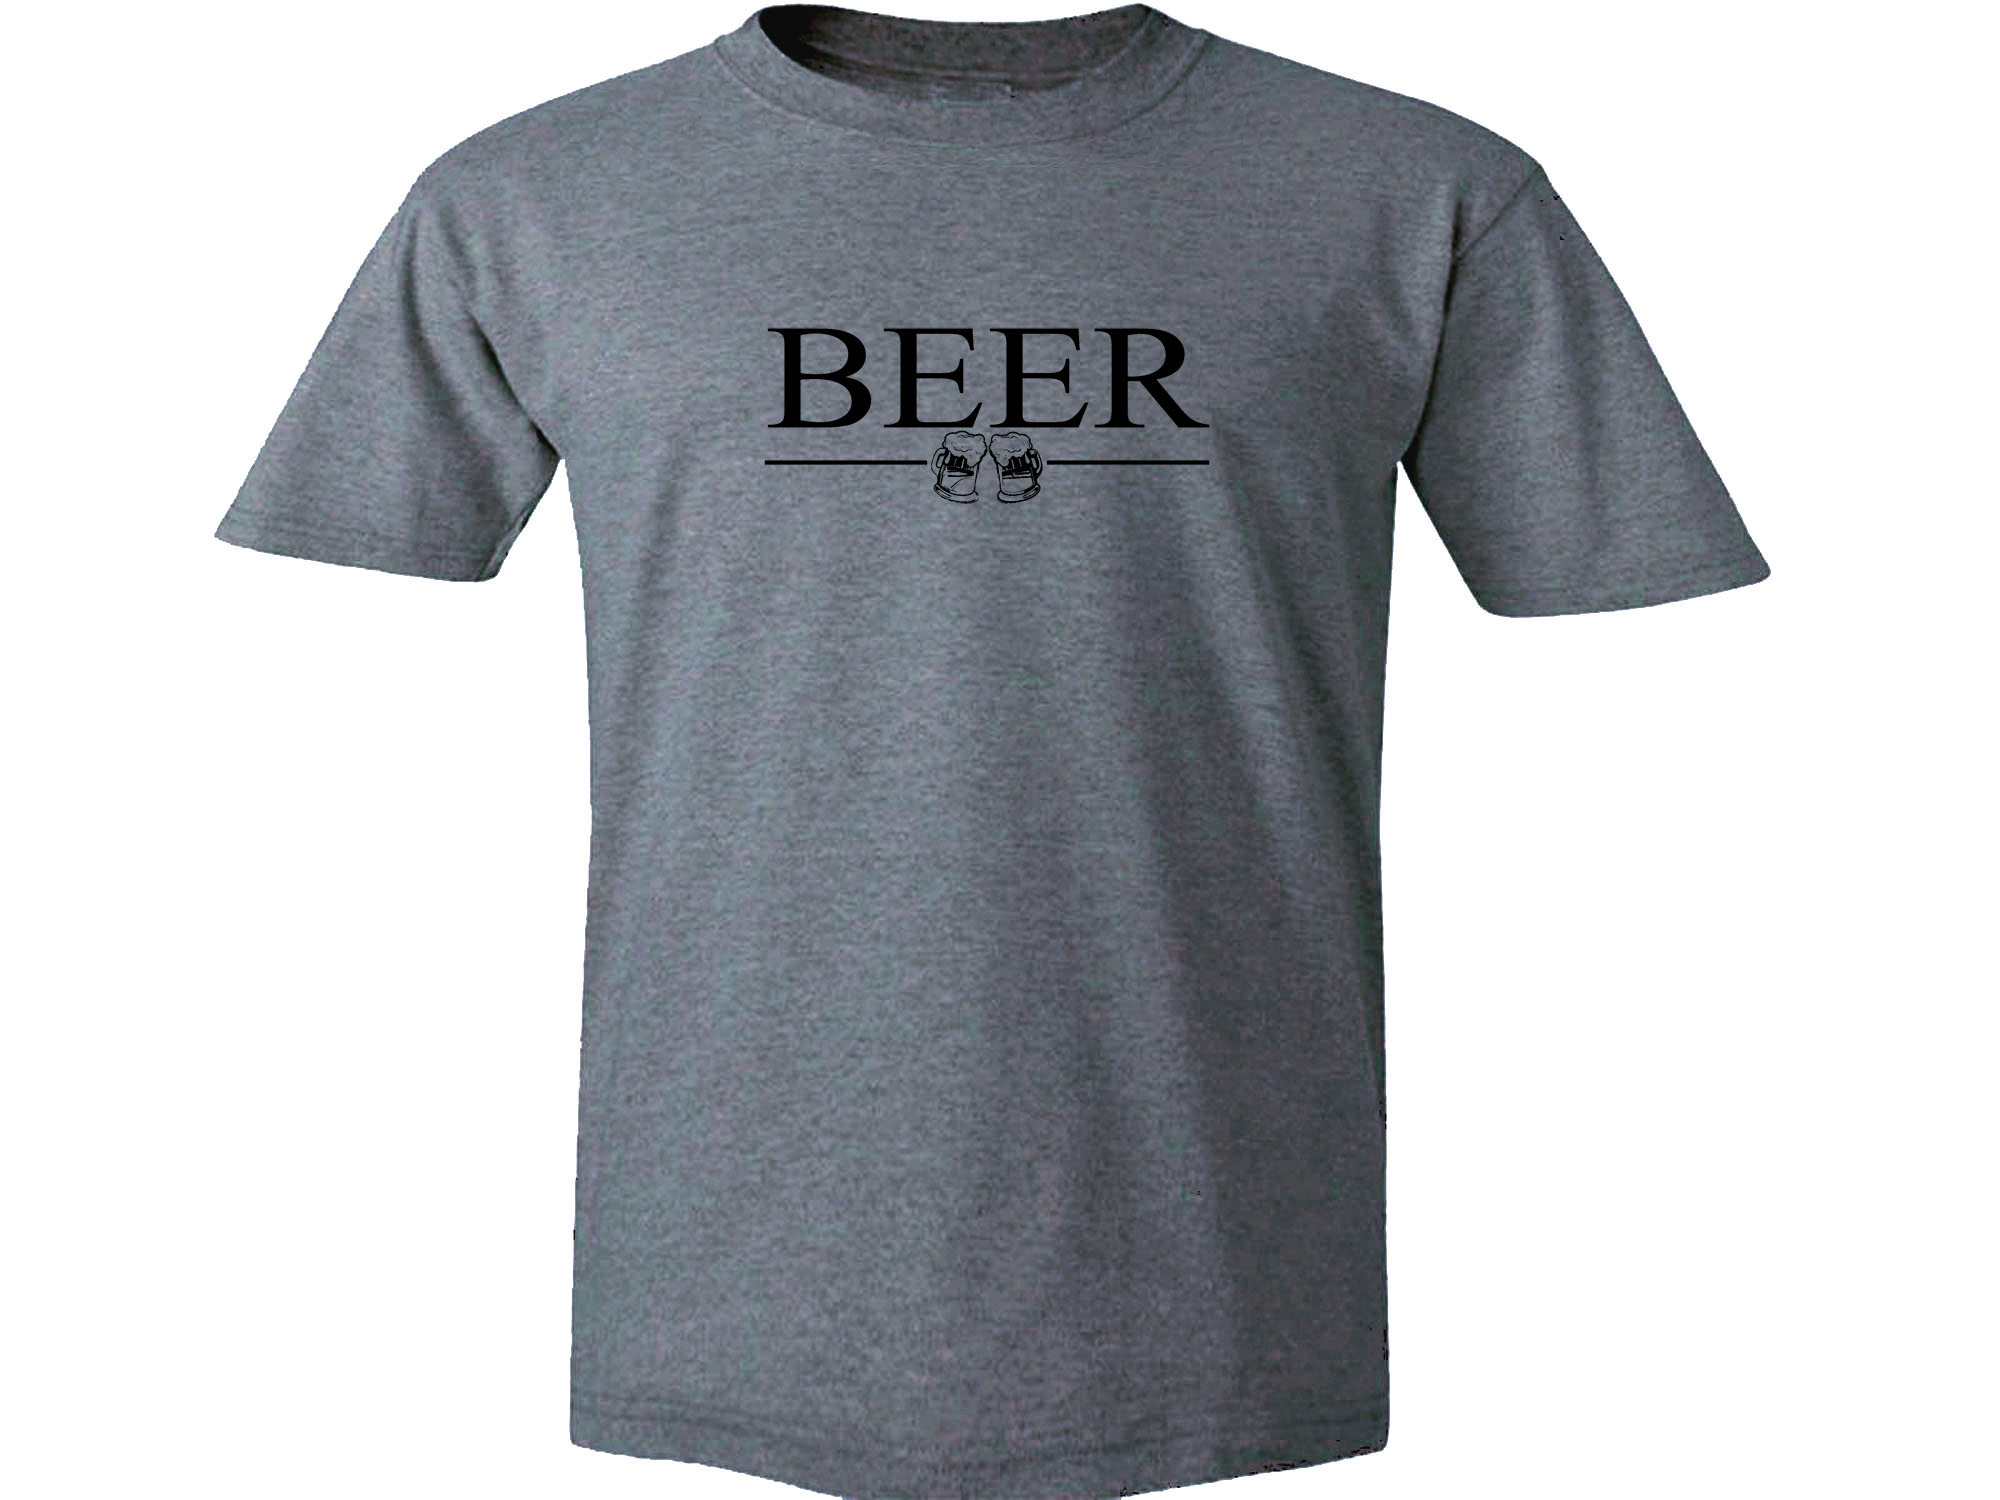 Beer funny drinking cheap customized patty gray t shirt 2